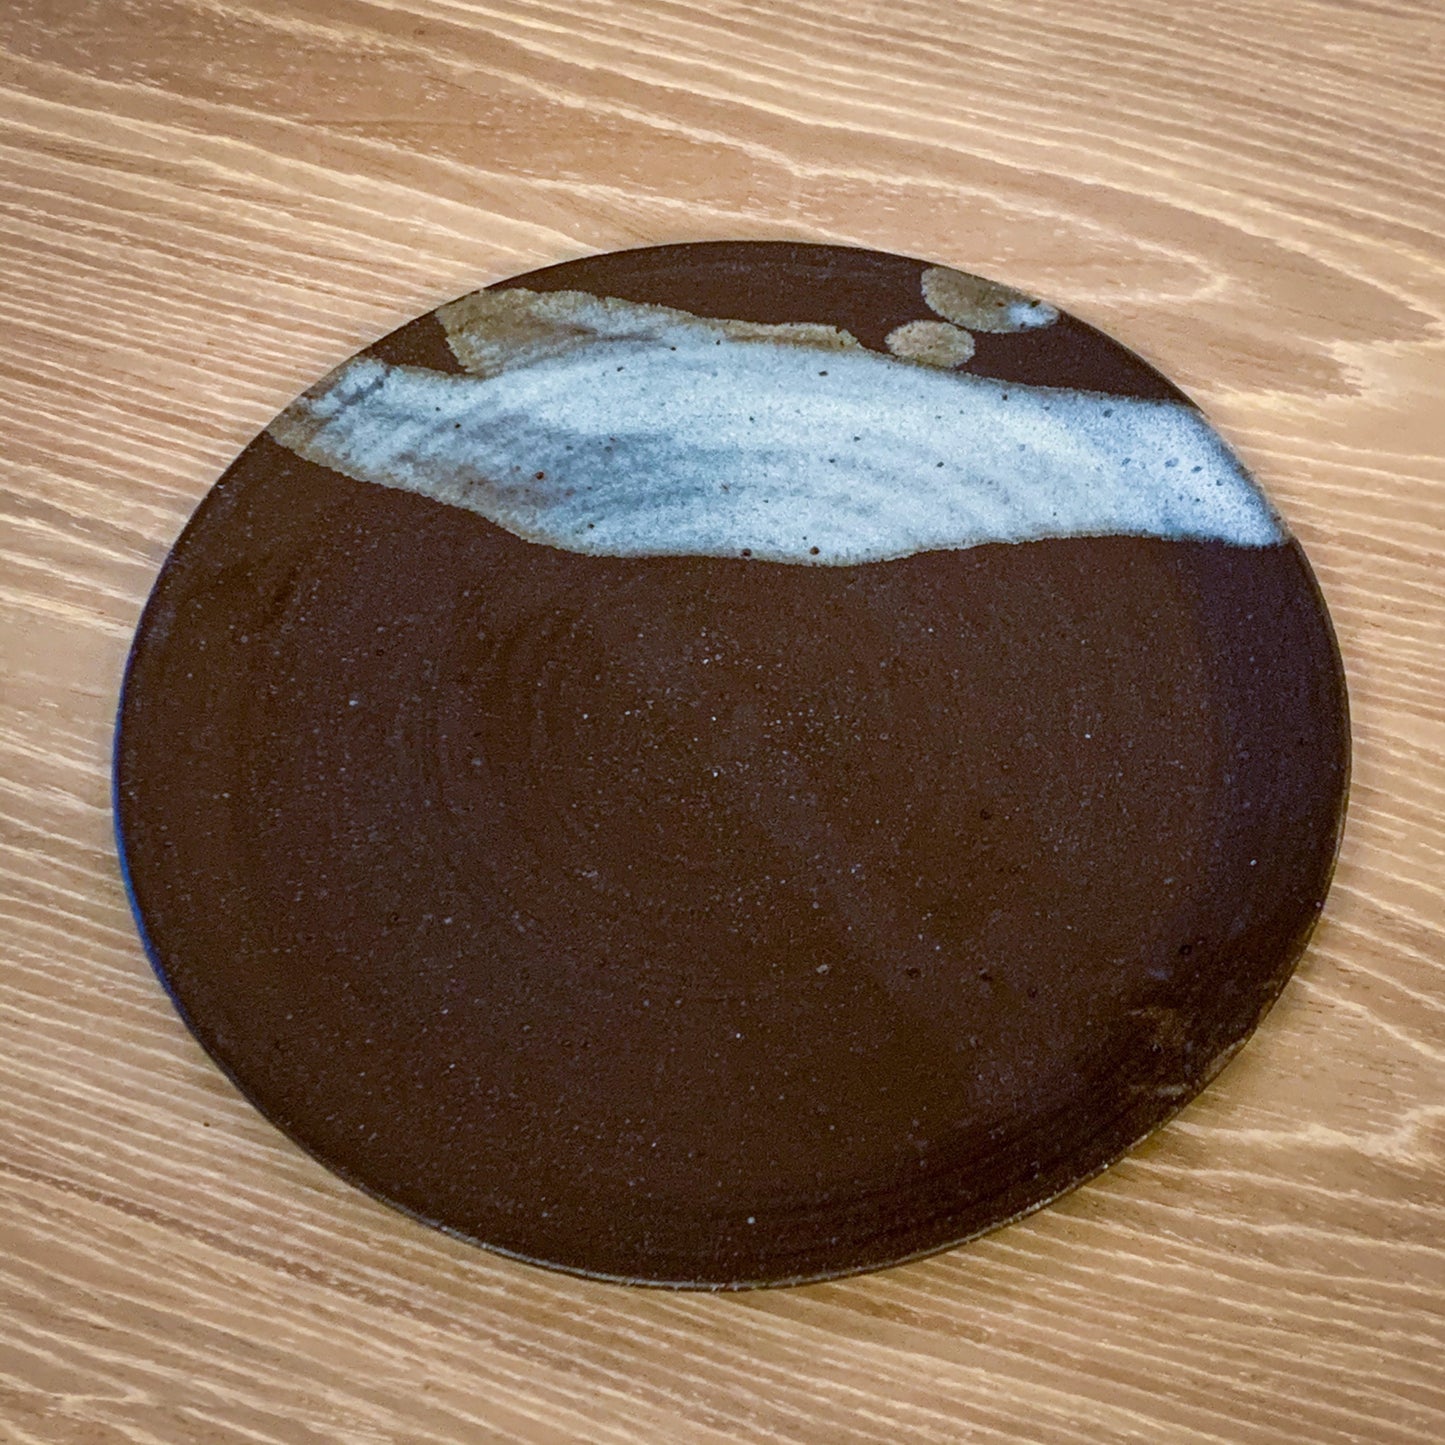 Pottery plate in matt brown color with shiny blue splash